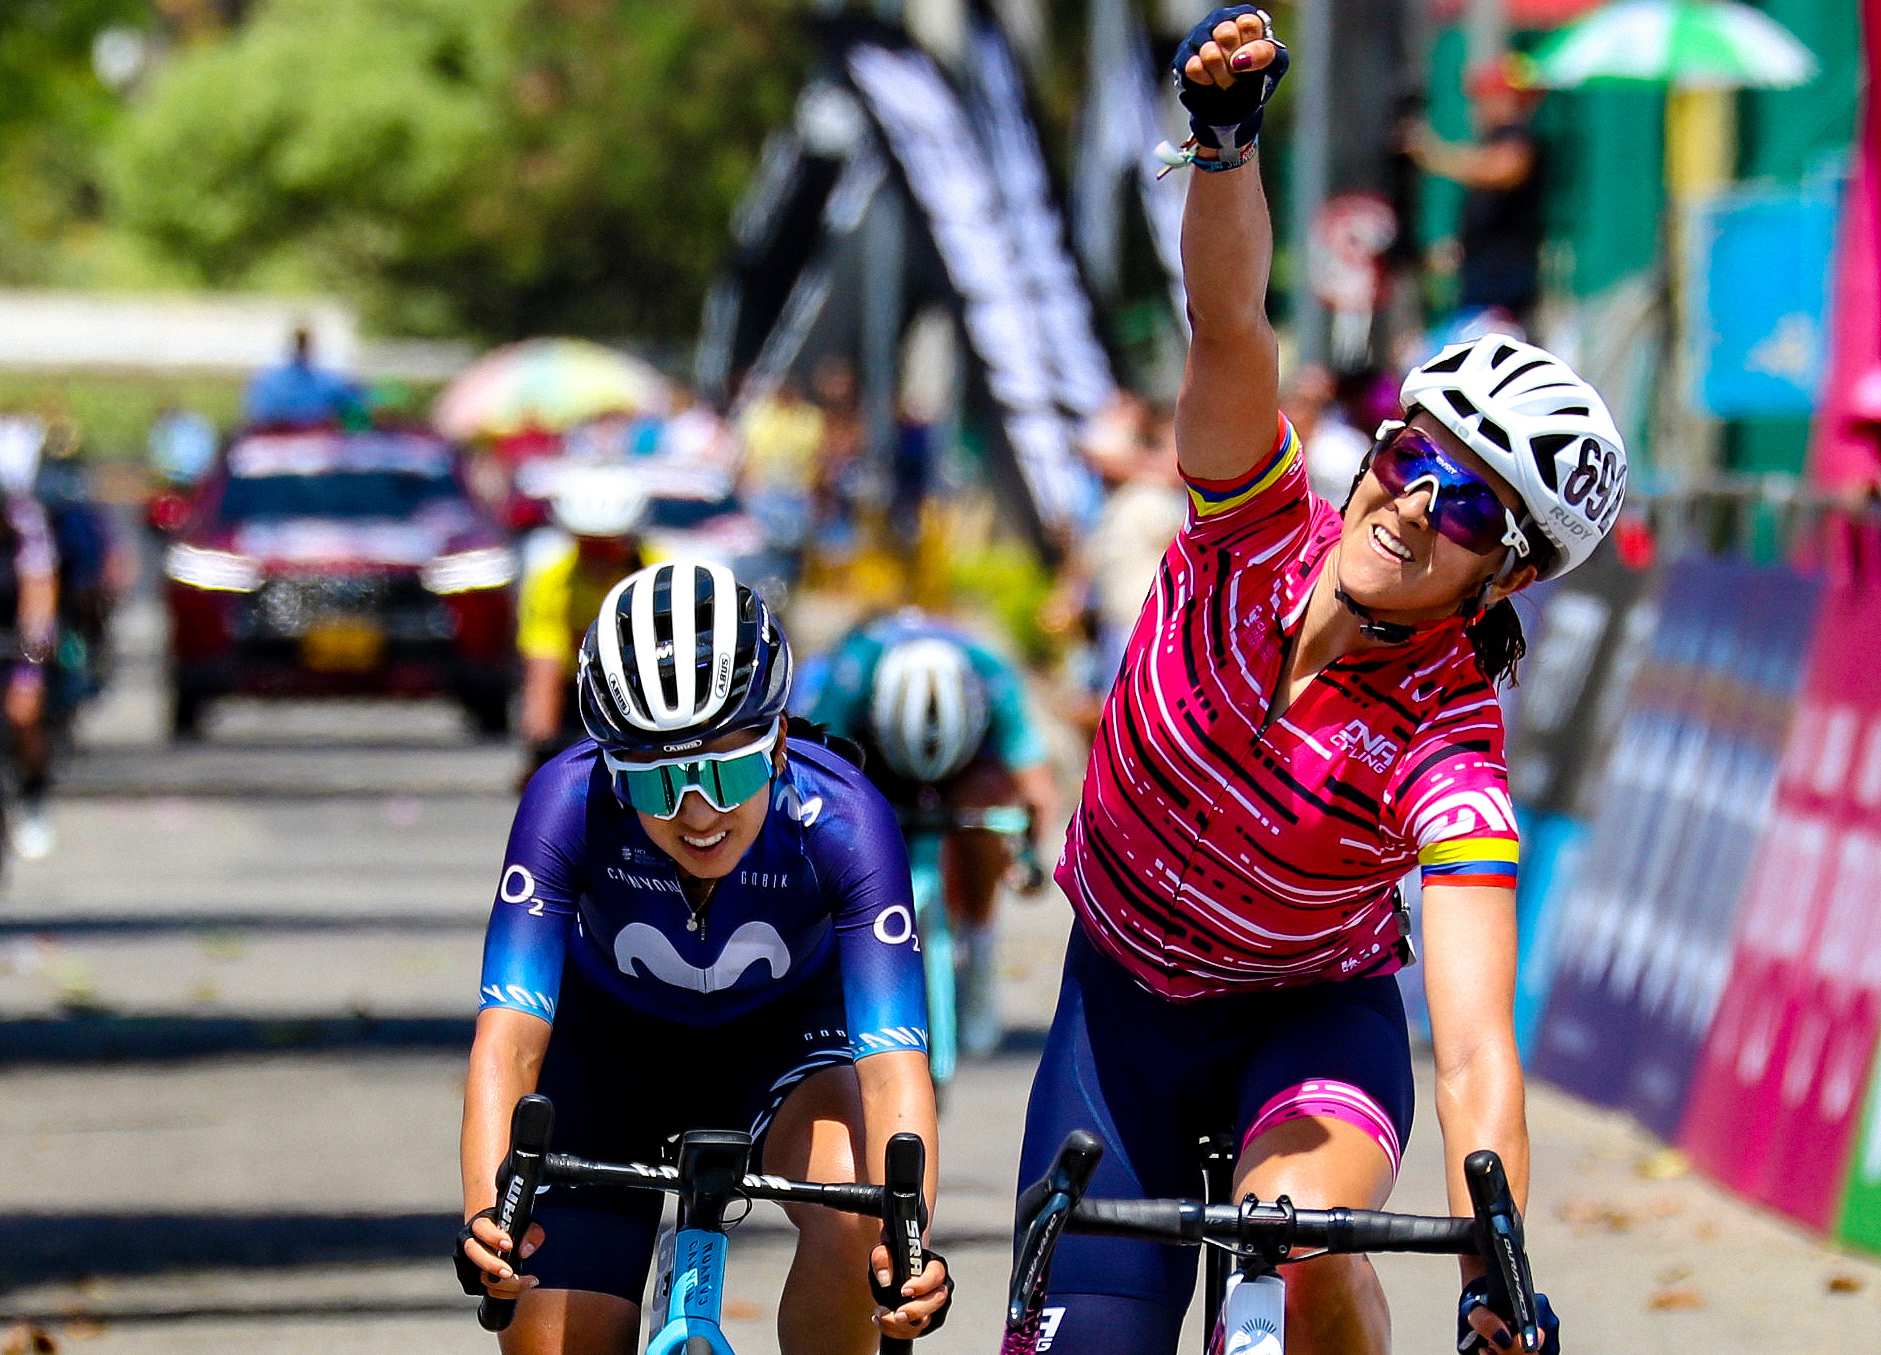 Peñuela sprints to second consecutive Colombian road race national title